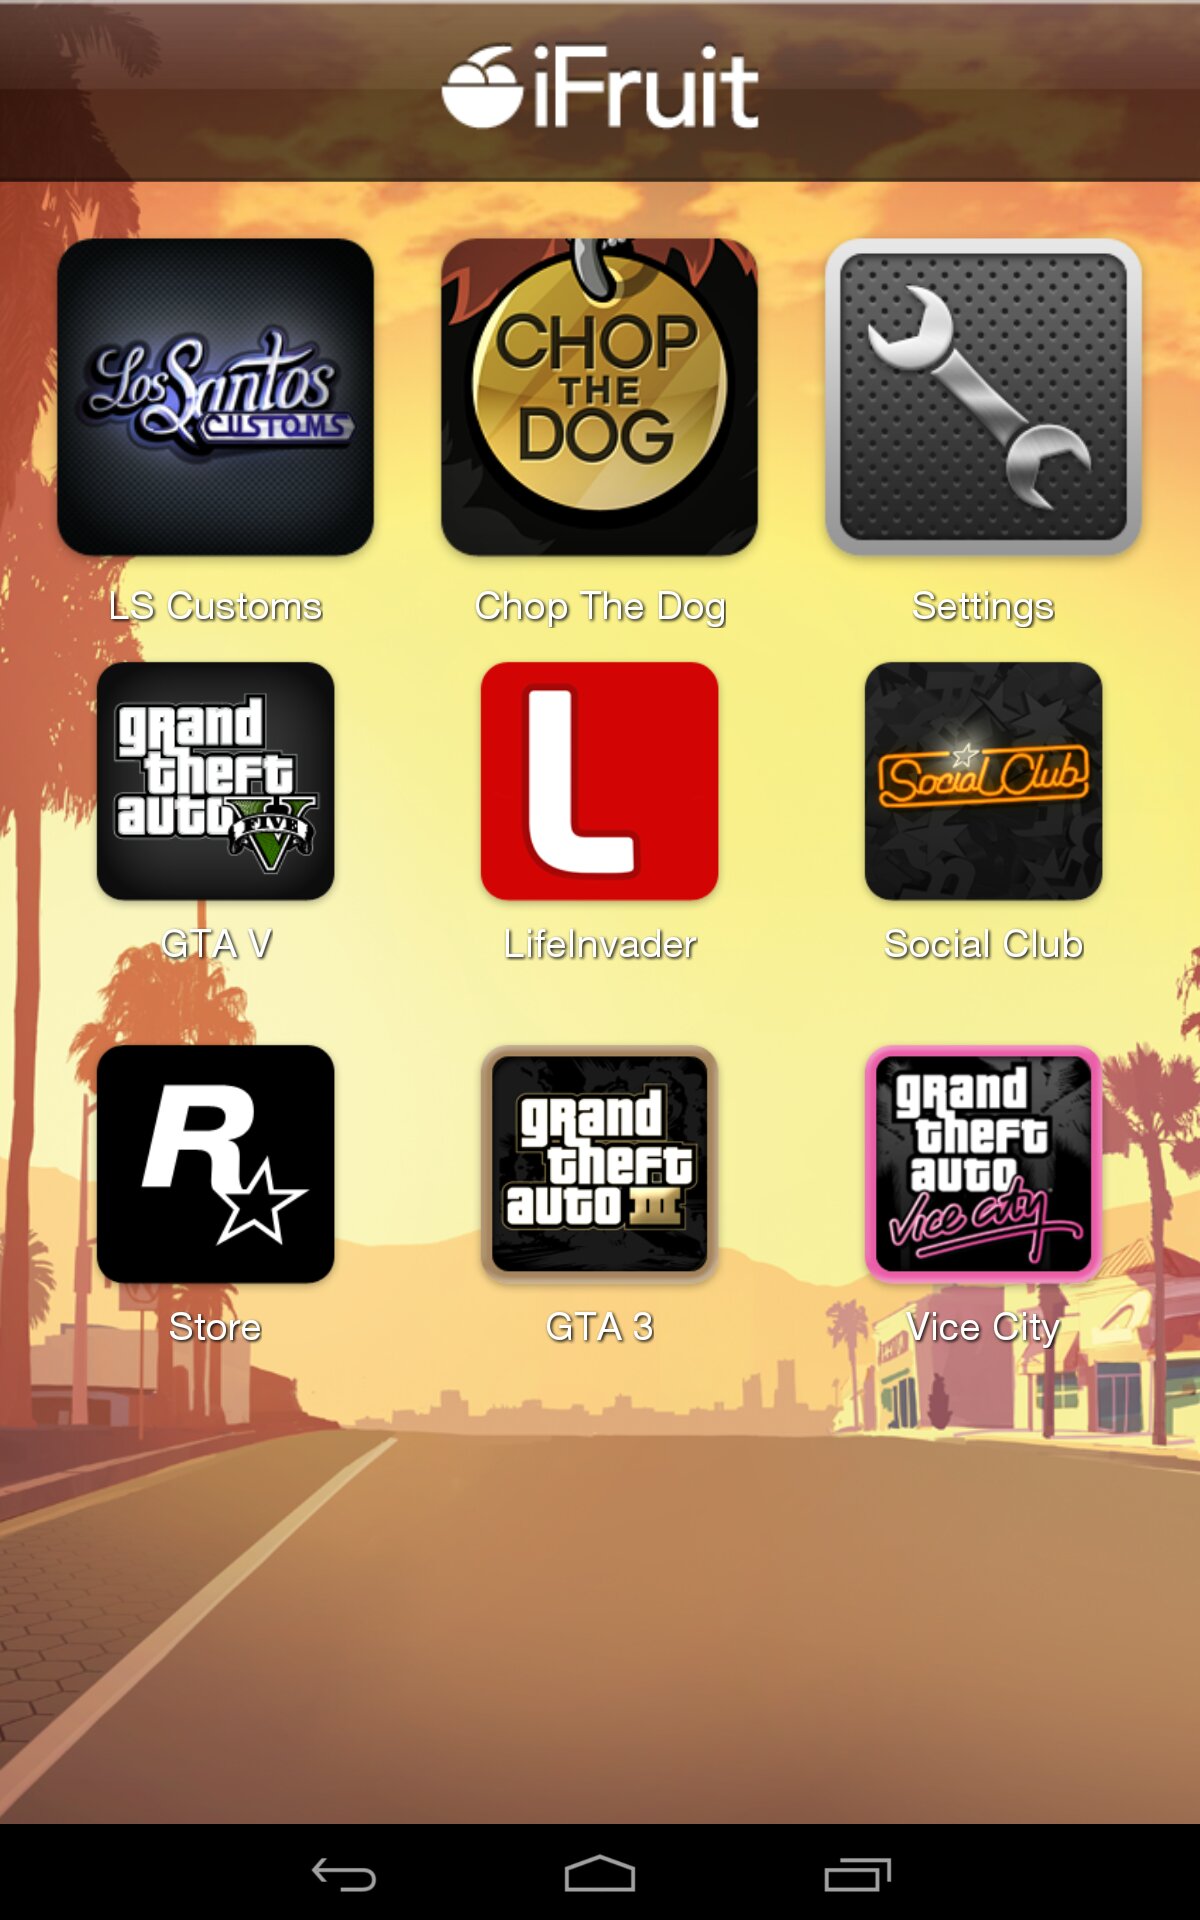 How to download ifruit gta 5 ps3 game